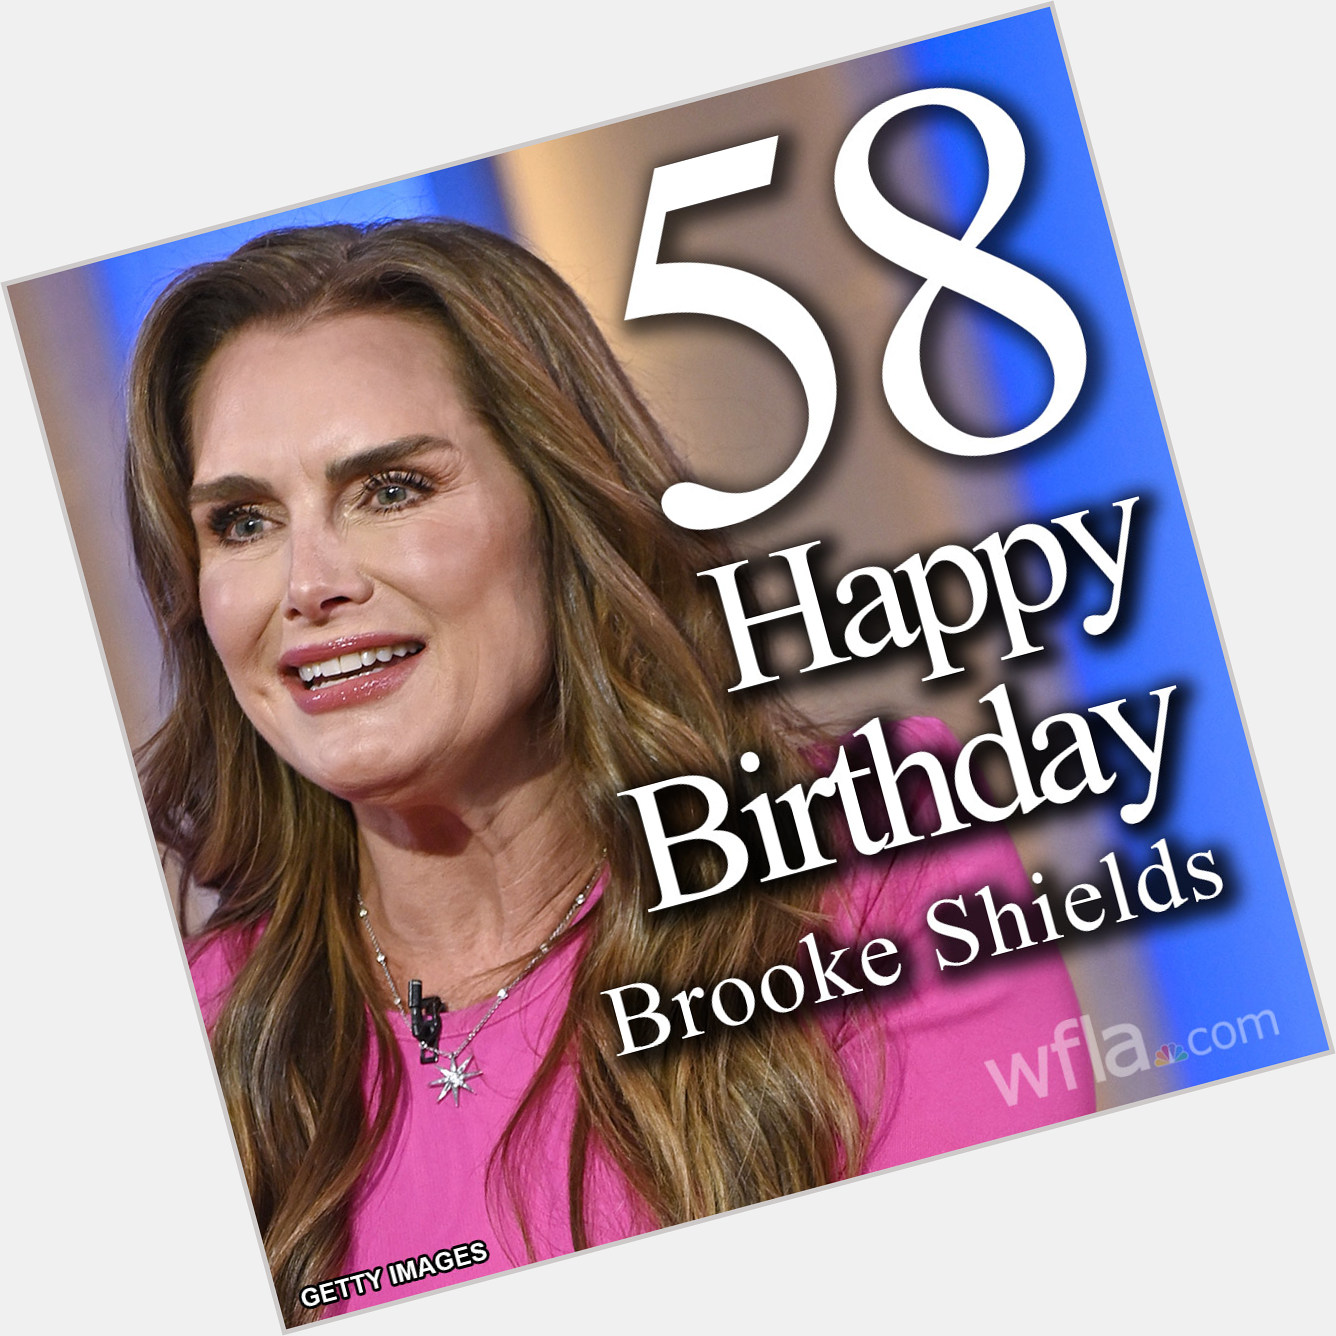 HAPPY BIRTHDAY, BROOKE SHIELDS! The actress and model turns 58 today!  